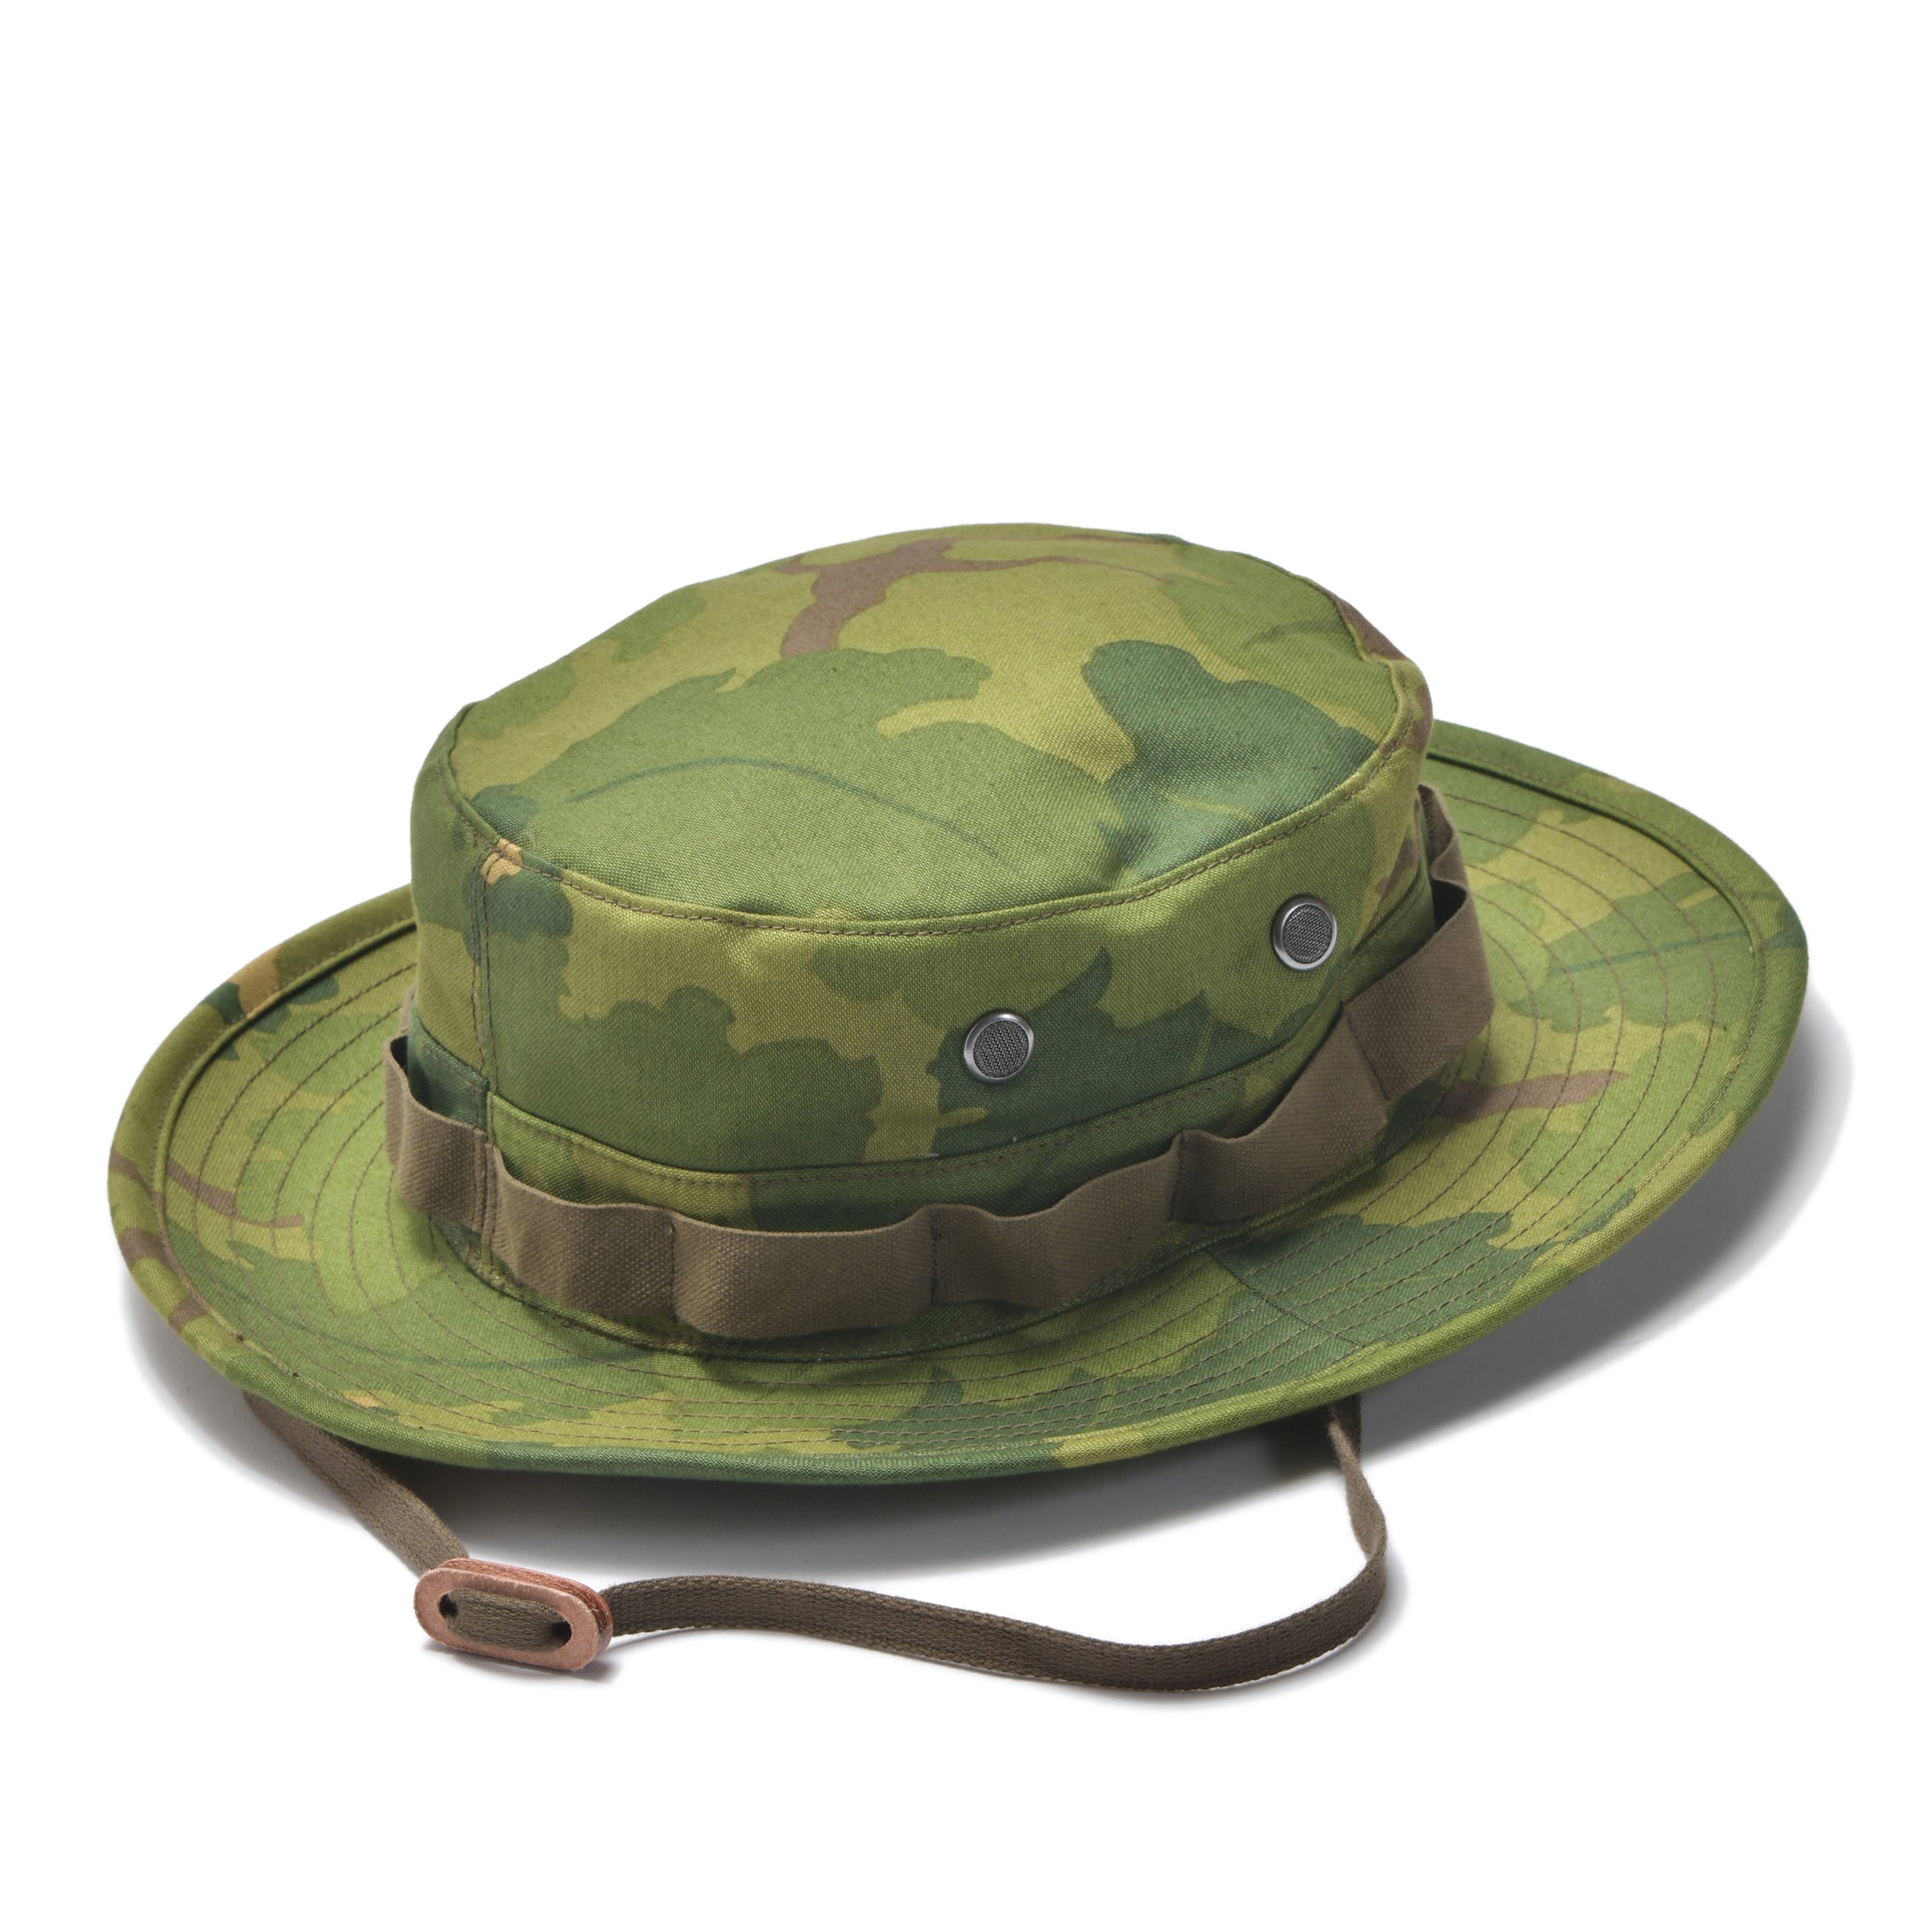 CAMOUFLAGE BOONIE HAT / MITCHELL PATTERN – The Real McCoy's